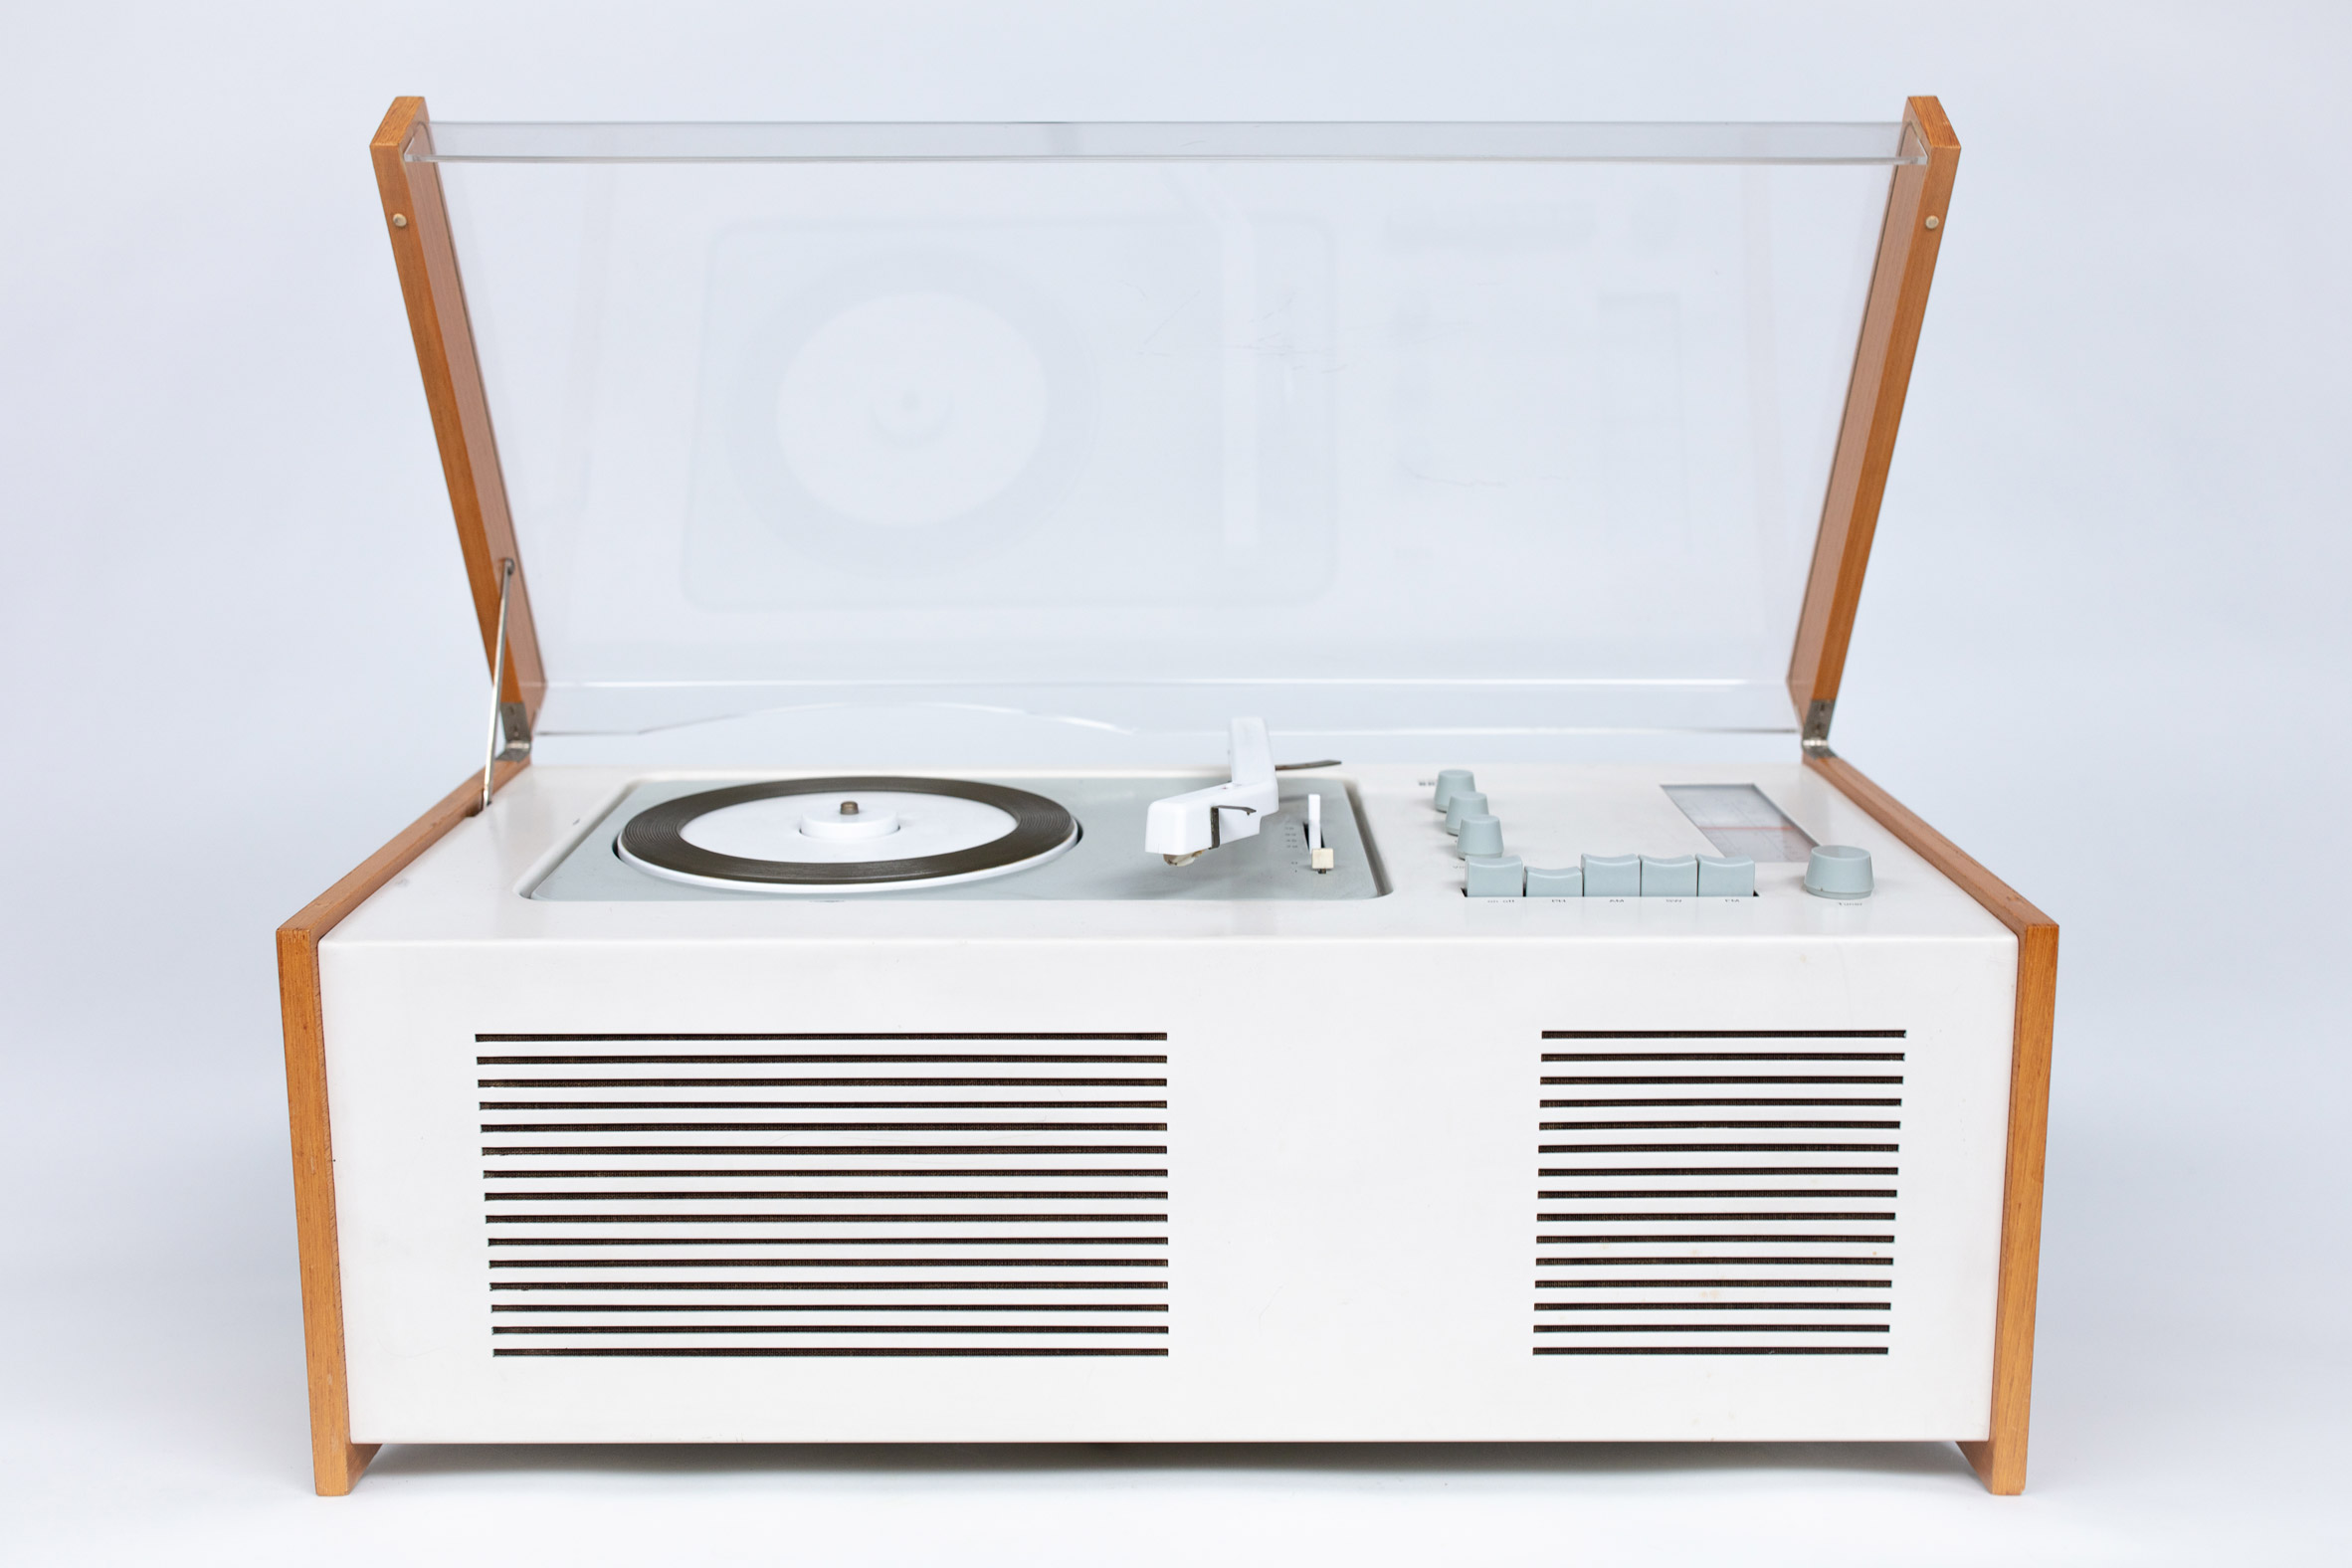 Filmmaker Gary Hustwit has released the first ever documentary about legendary industrial designer Dieter Rams